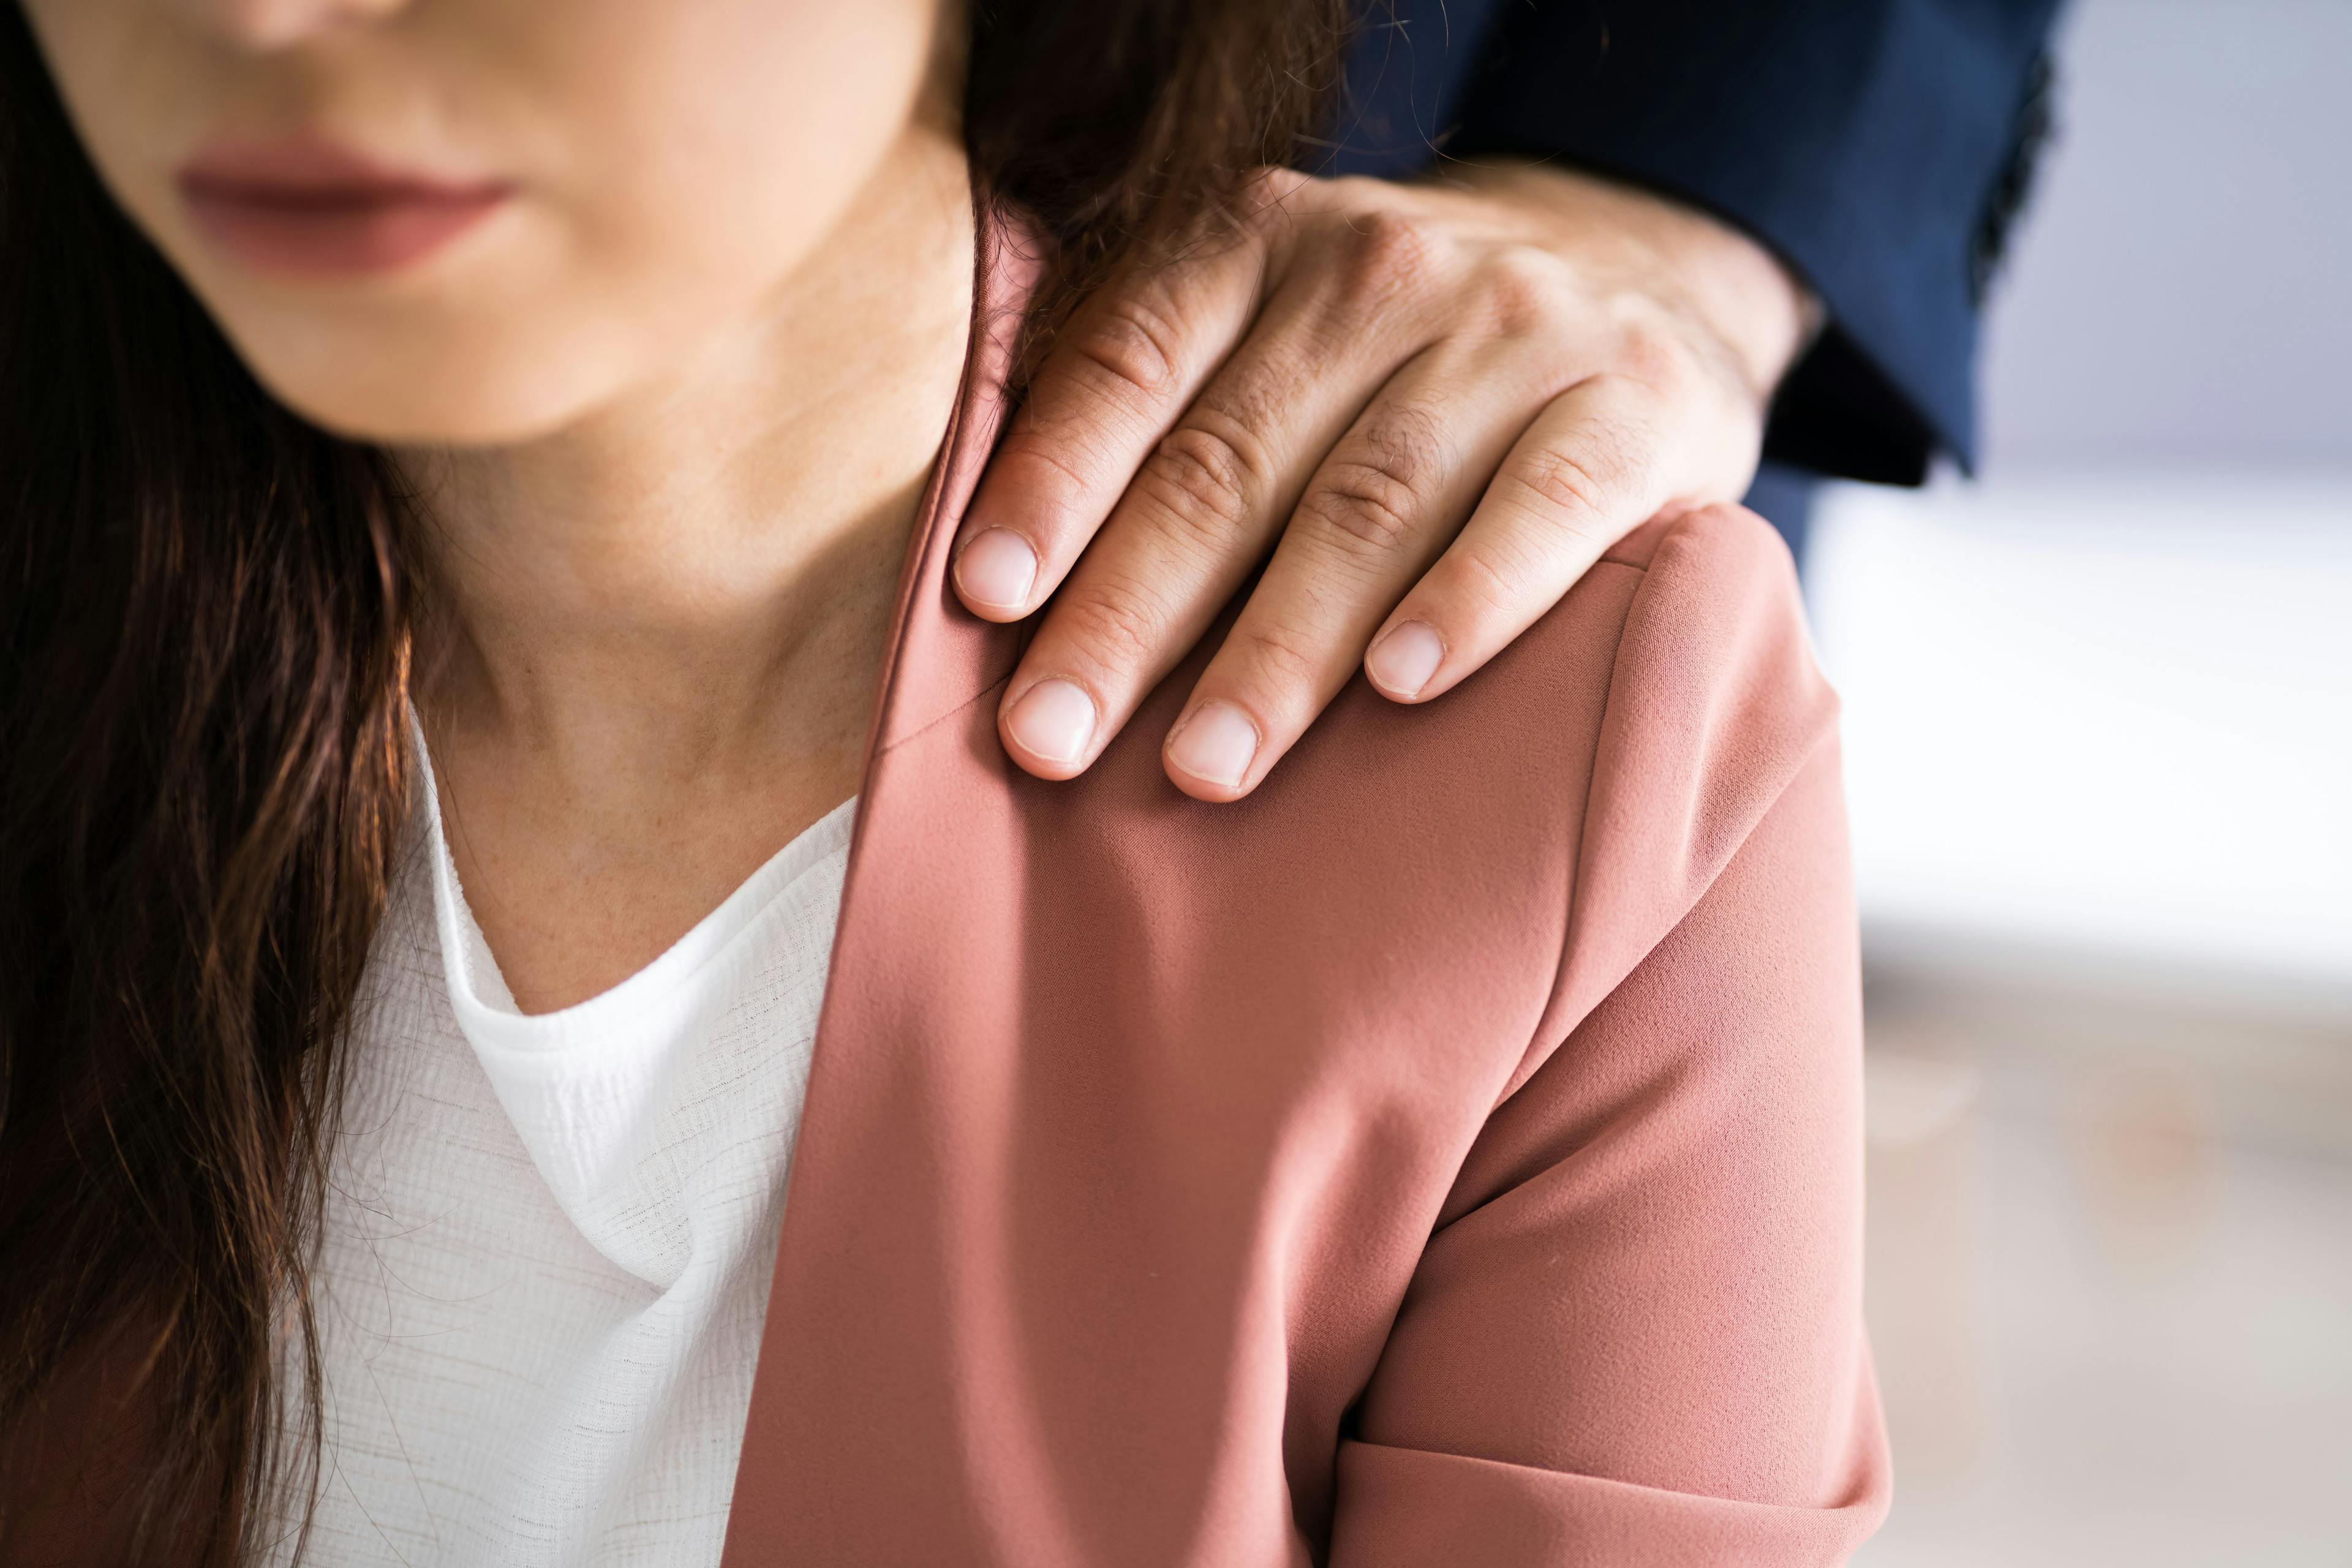 Workplace Sexual Harassment Tied to Higher Risk of CVD, T2D in Men and Women / Image credit: ©Andrey Popov/AdobeStock